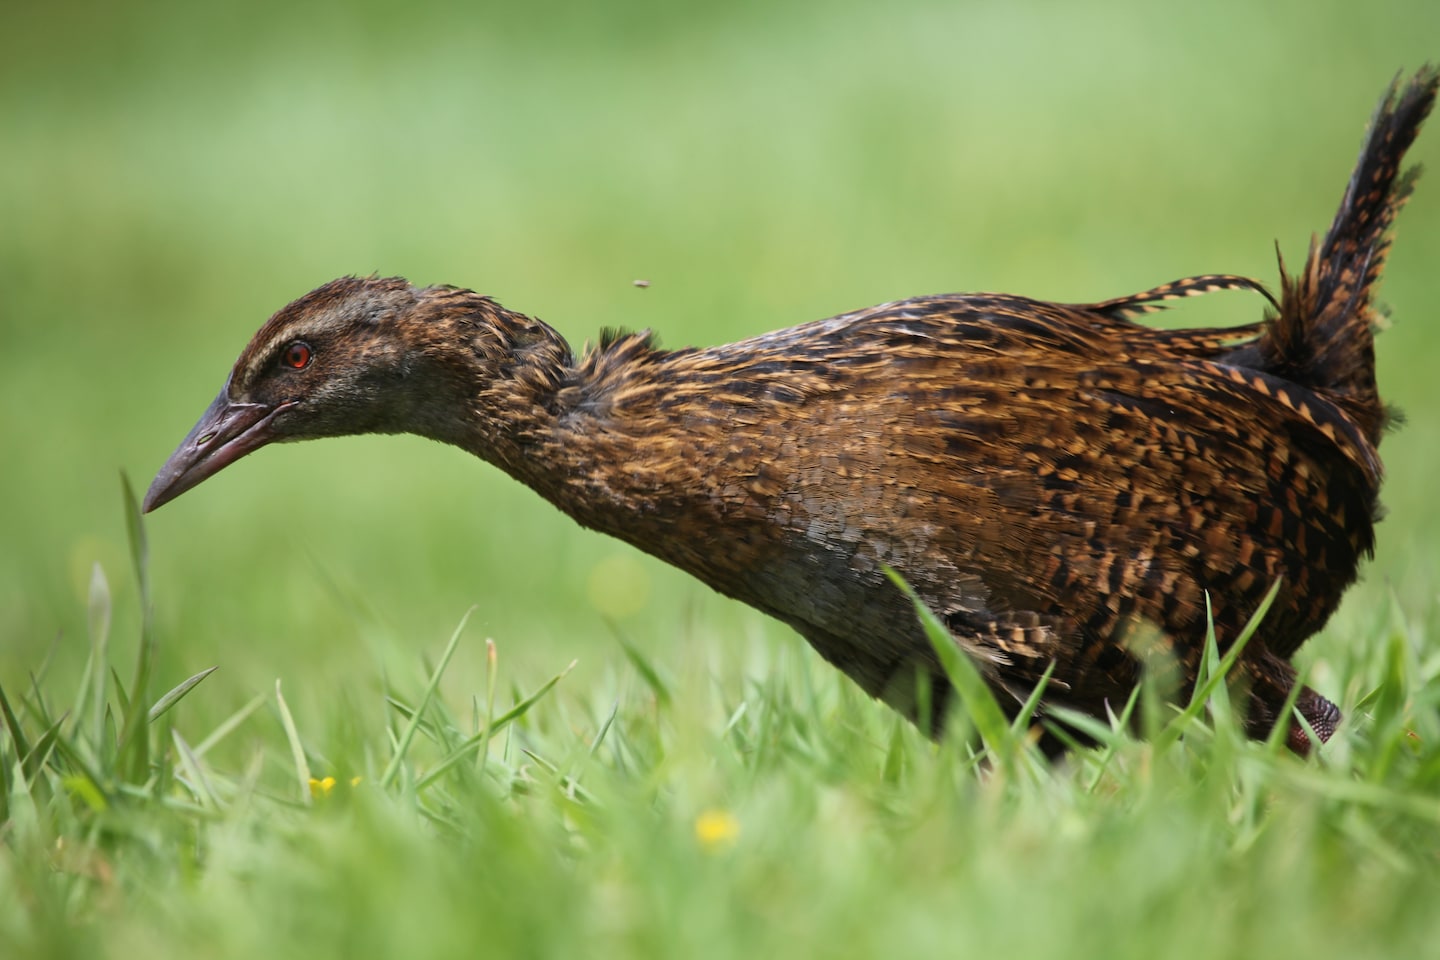 Contestant on ‘Race to Survive’ show kills New Zealand protected weka bird